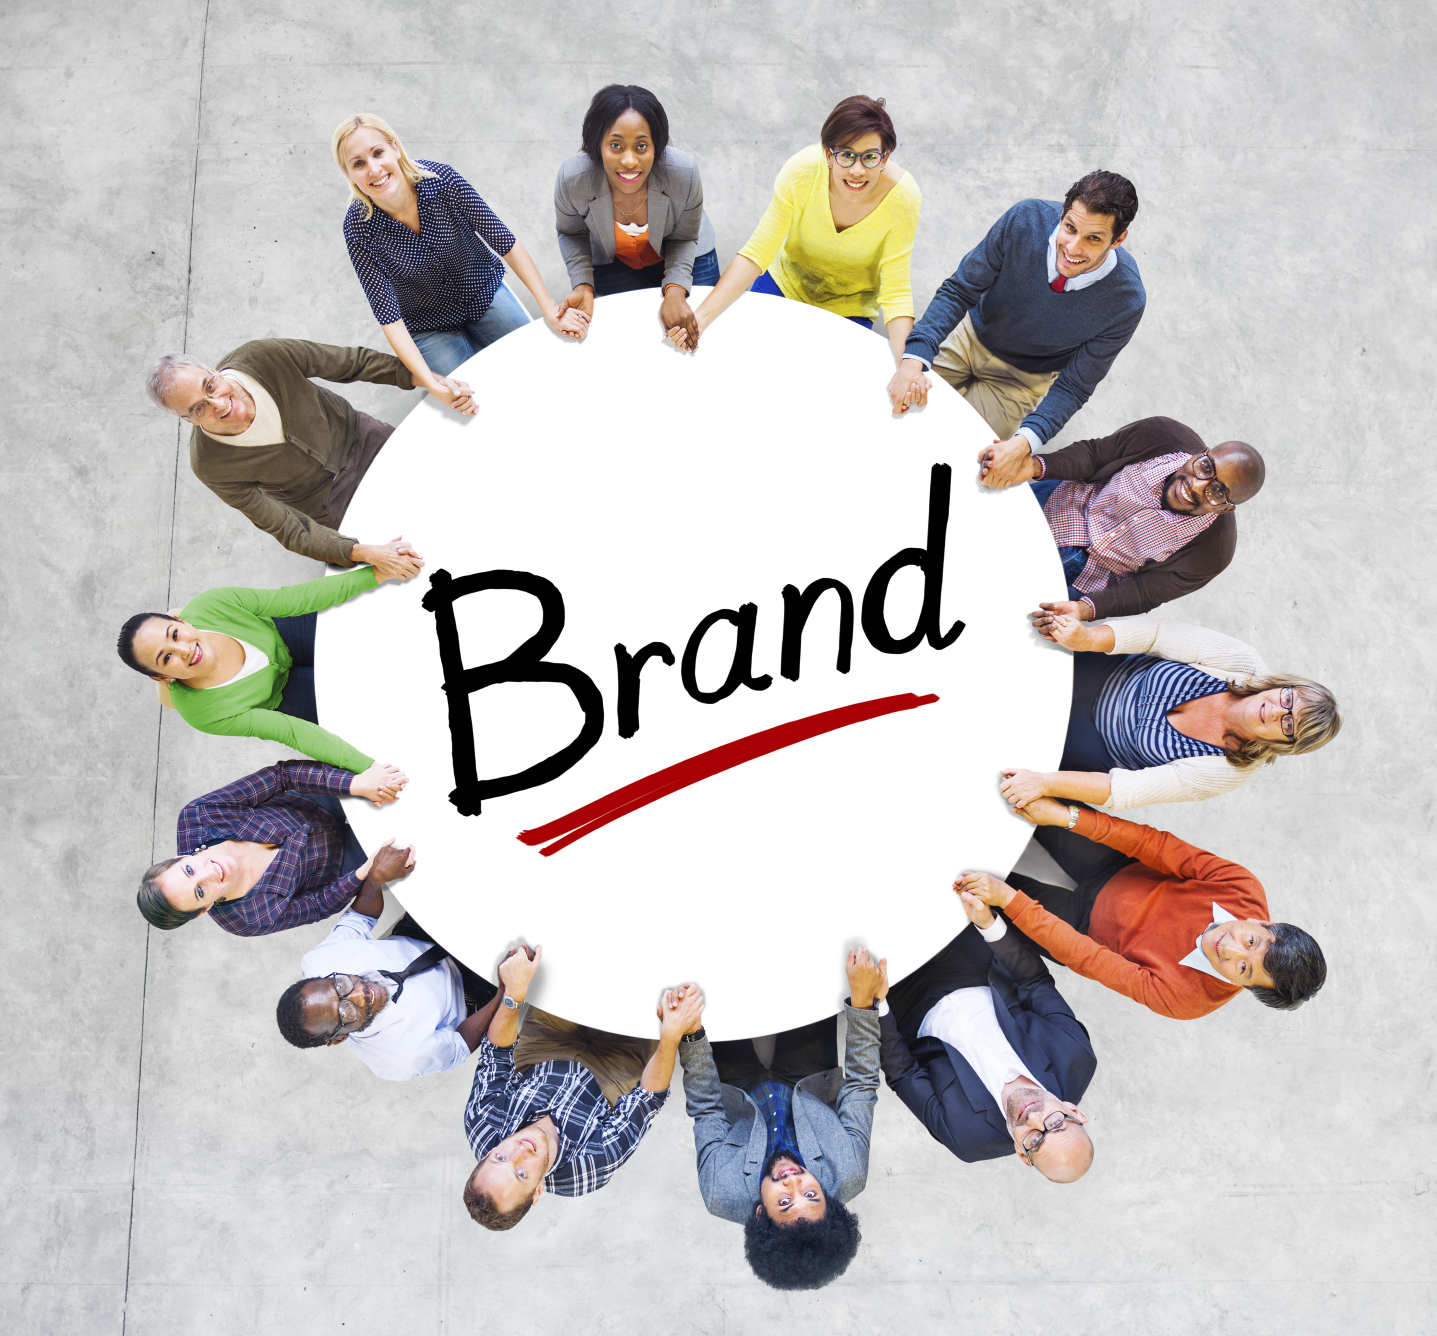 Brand building with content marketing